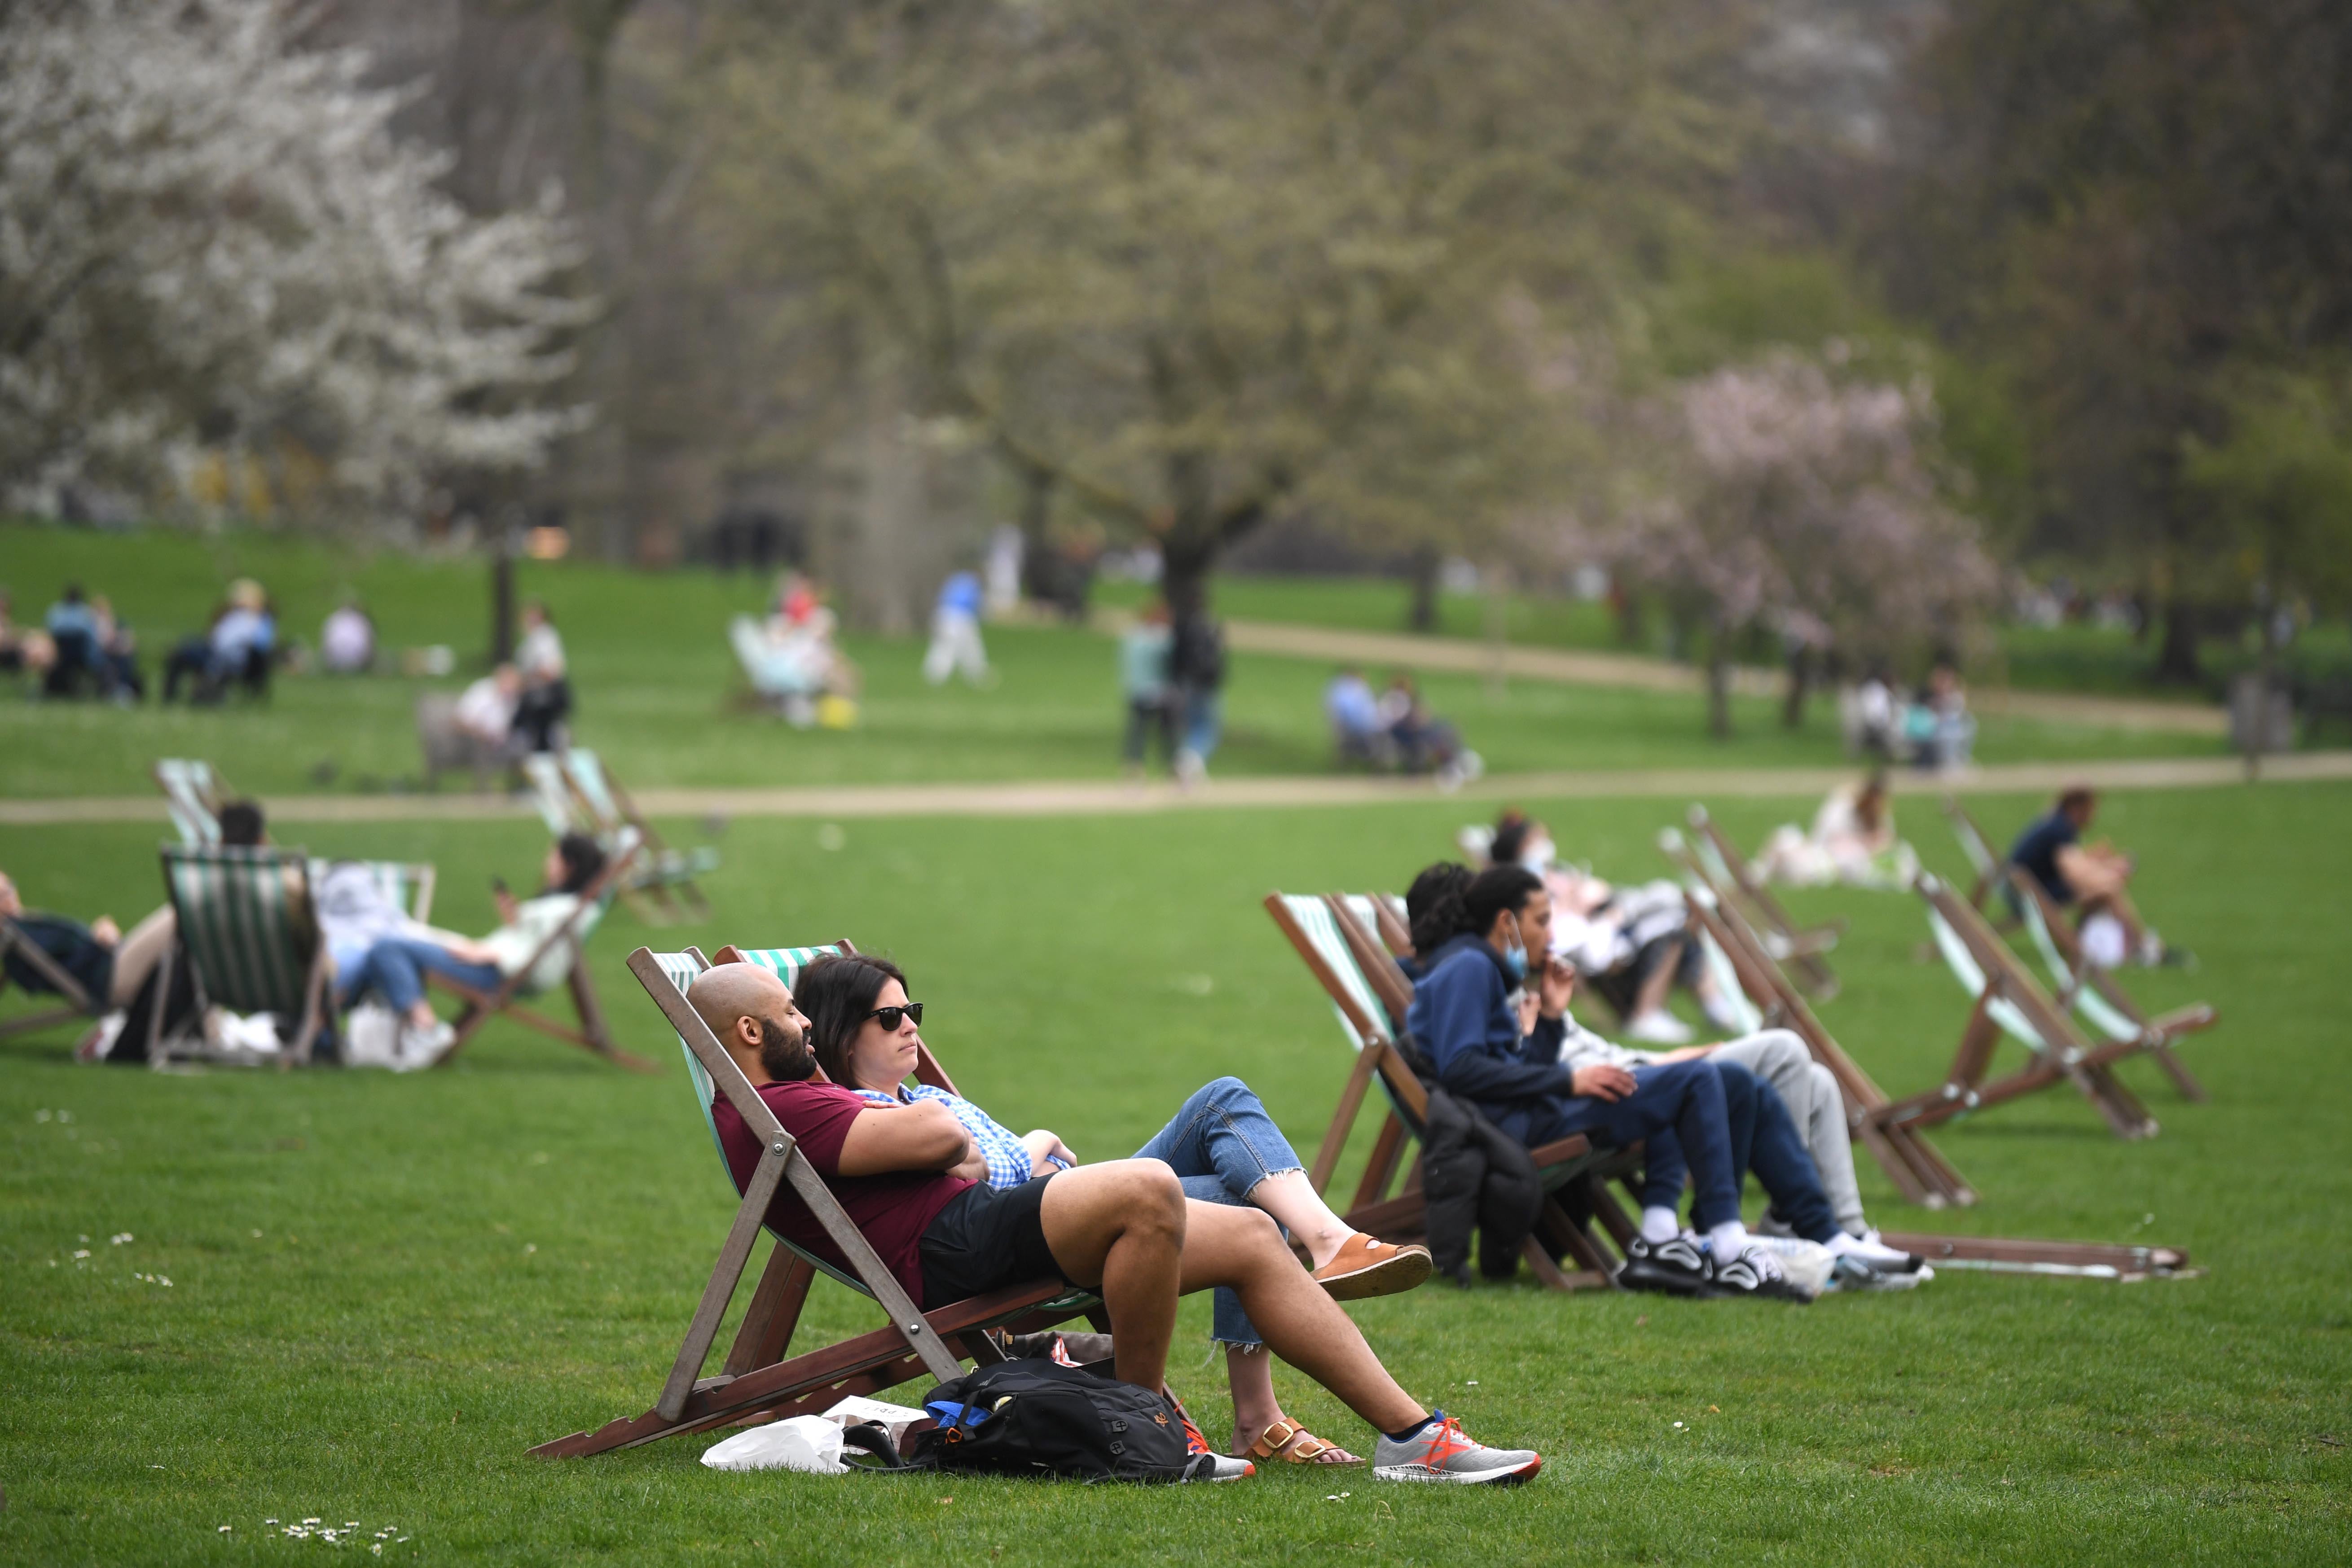 People in England enjoyed warm weather earlier this week as the rules were eased